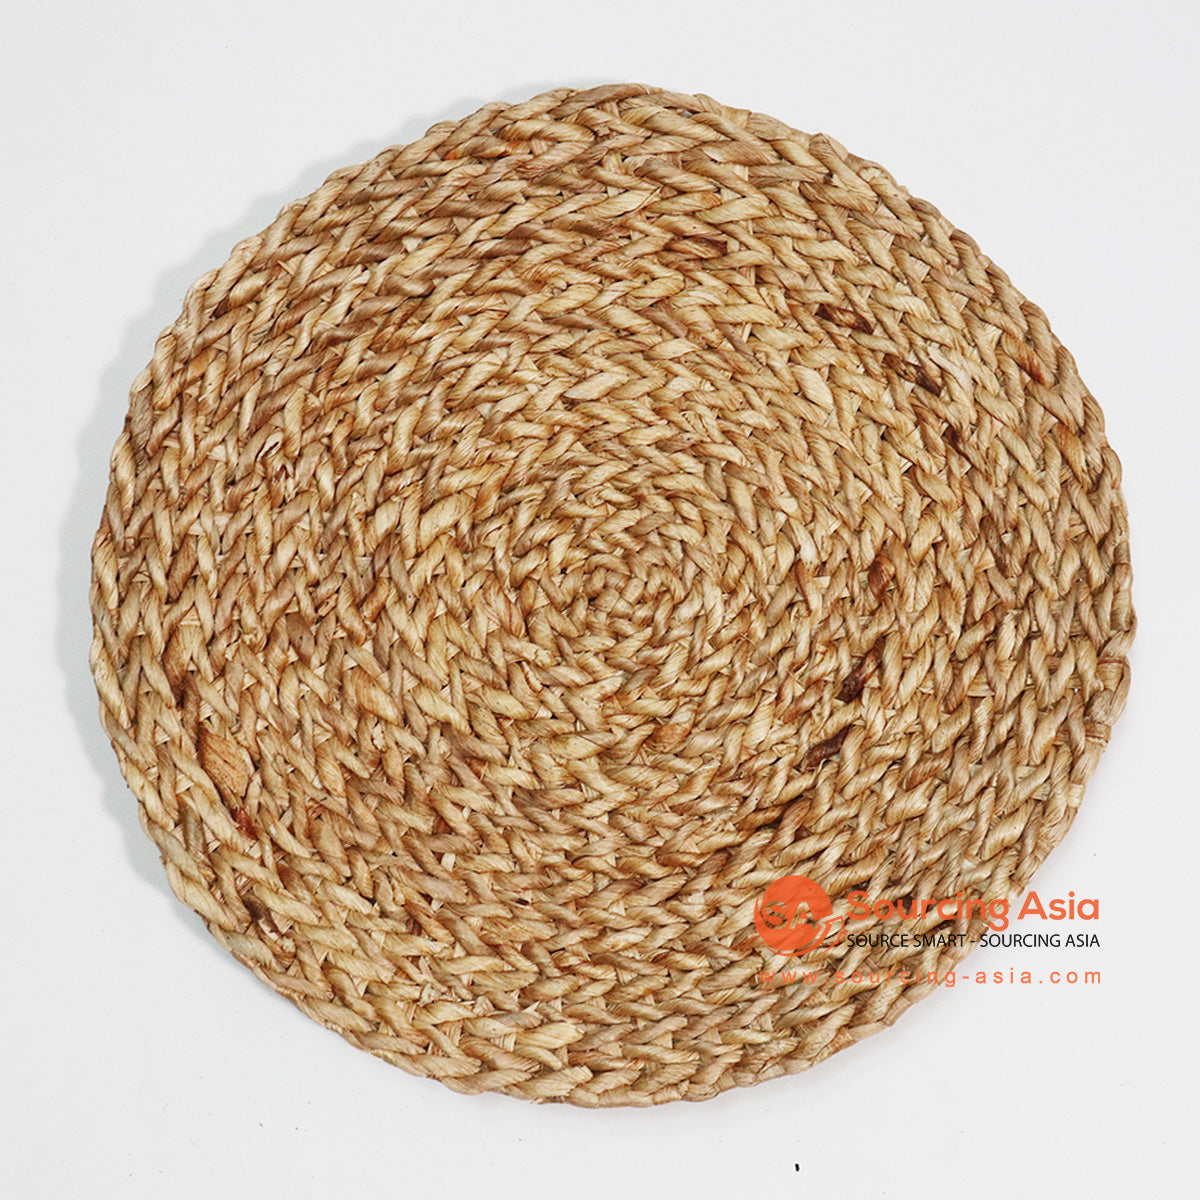 HBSC008-1 NATURAL WATER HYACINTH ROUND PLACEMAT